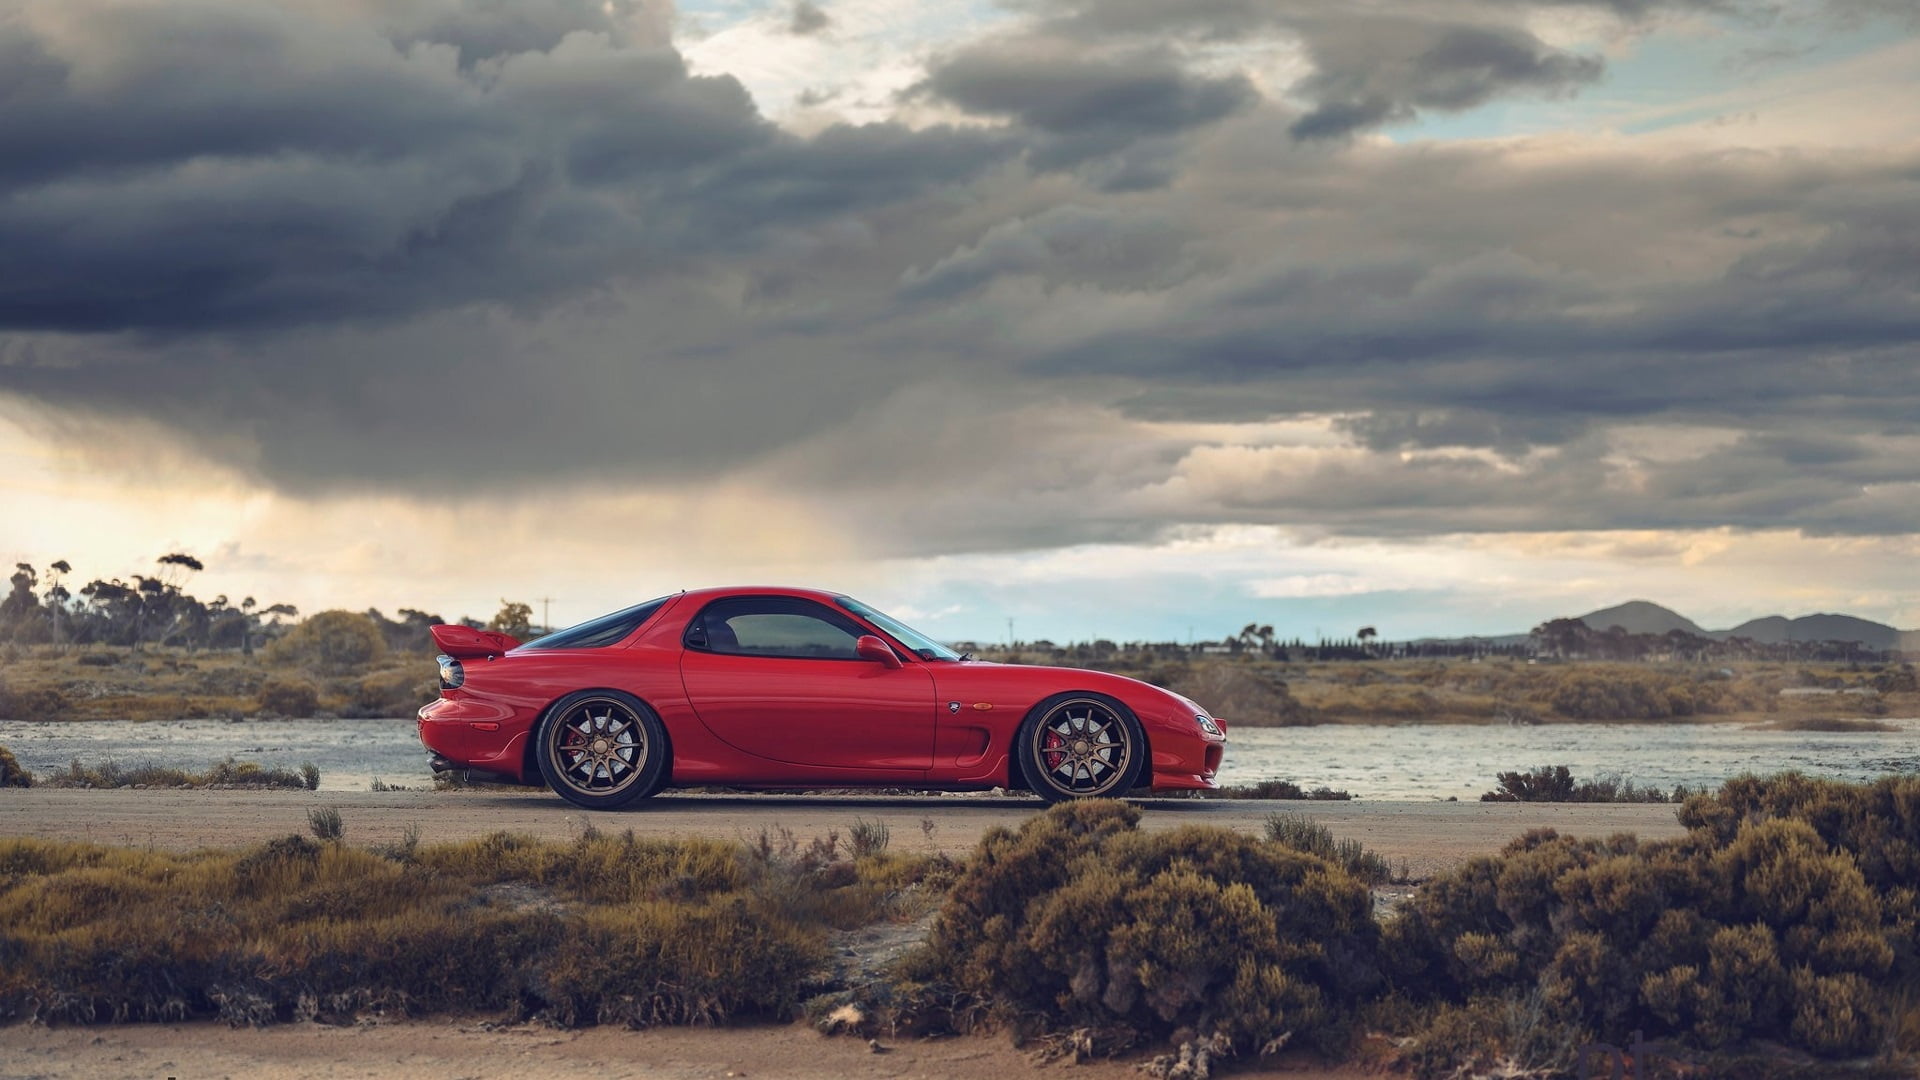 Mazda RX-7 FD, Japanese cars, JDM, red cars, clouds, sky, vehicle